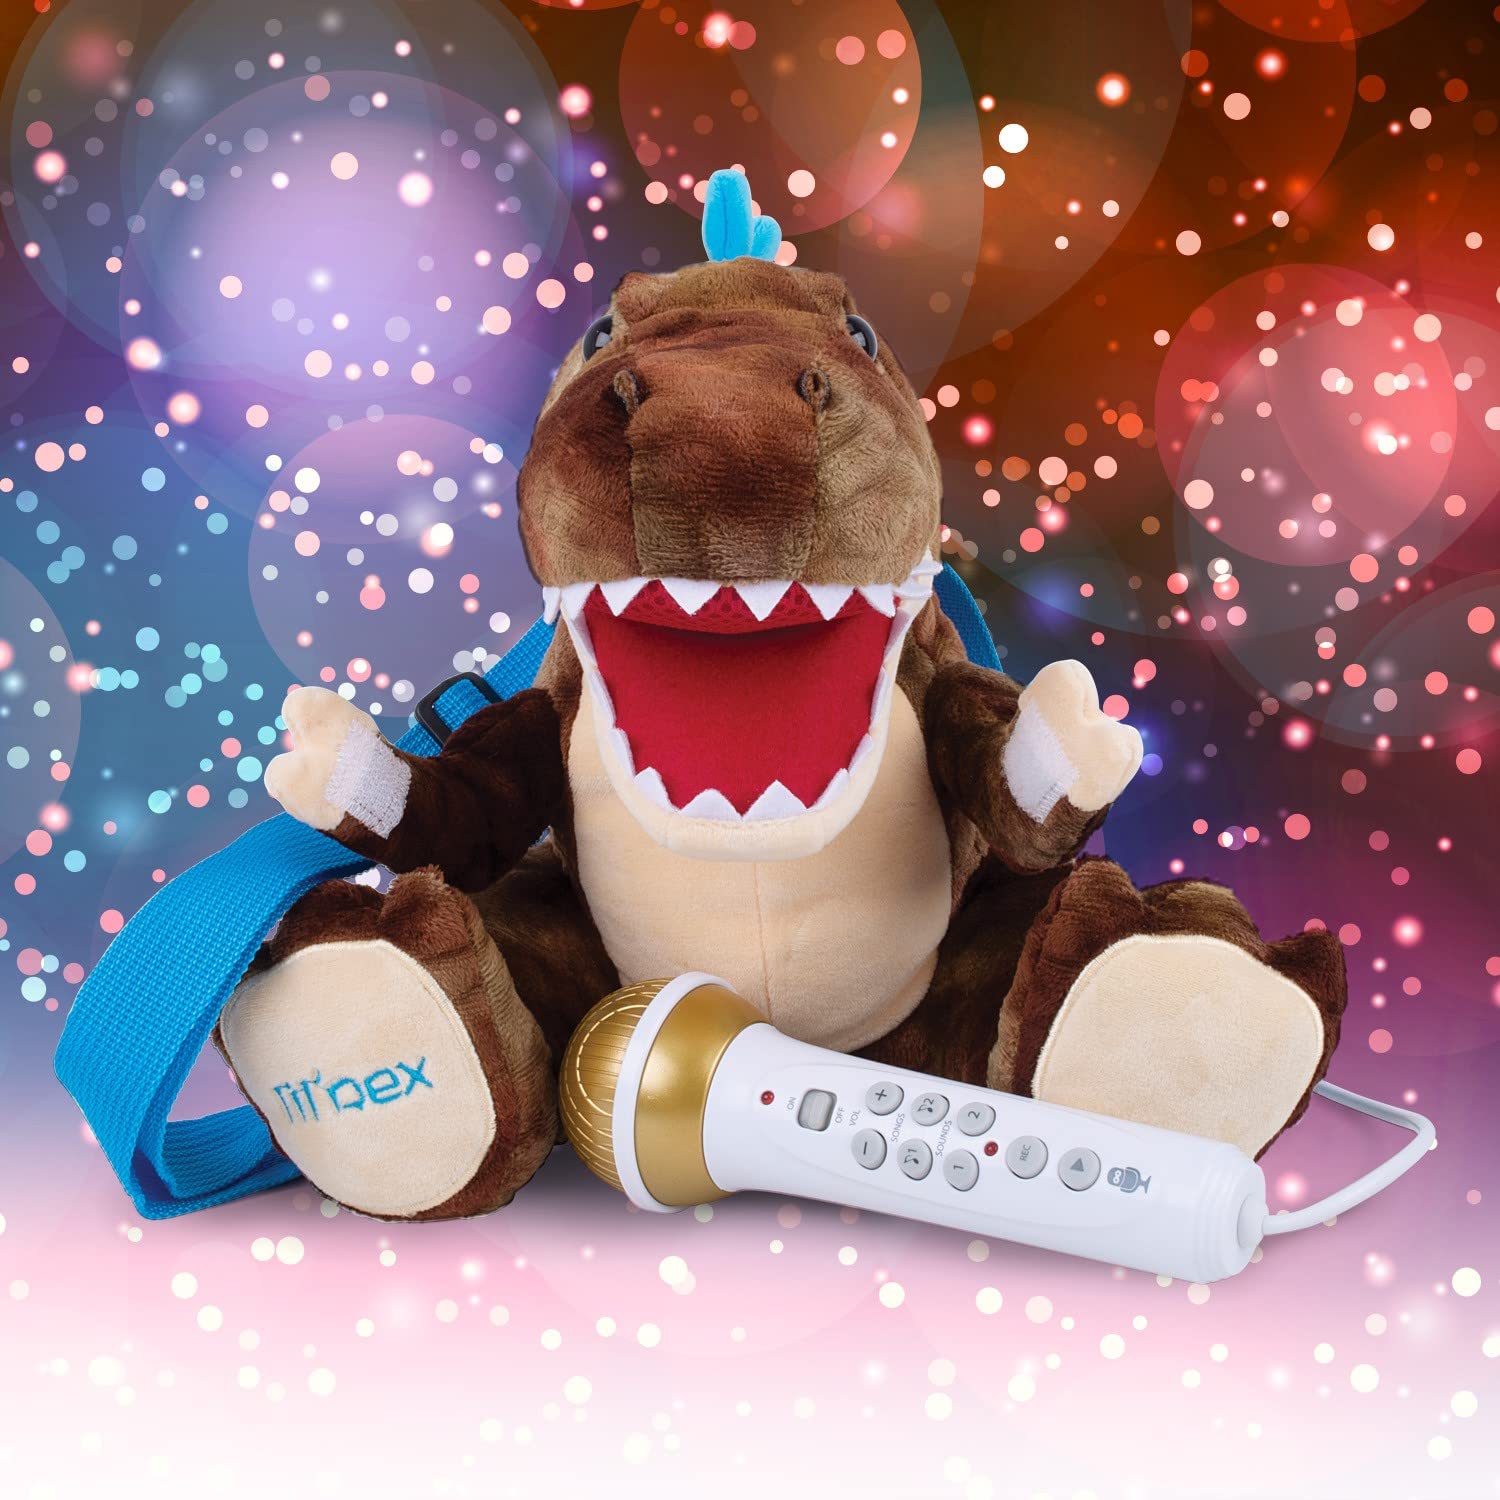 Singing Machine Portable Karaoke Machine for Kids, Plush Toy Backpack with Microphone - The Sing Along Crew, Lil Rex (Brown & Beige) - Built-In Karaoke Speaker with Songs, Sound Effects, & Recorder